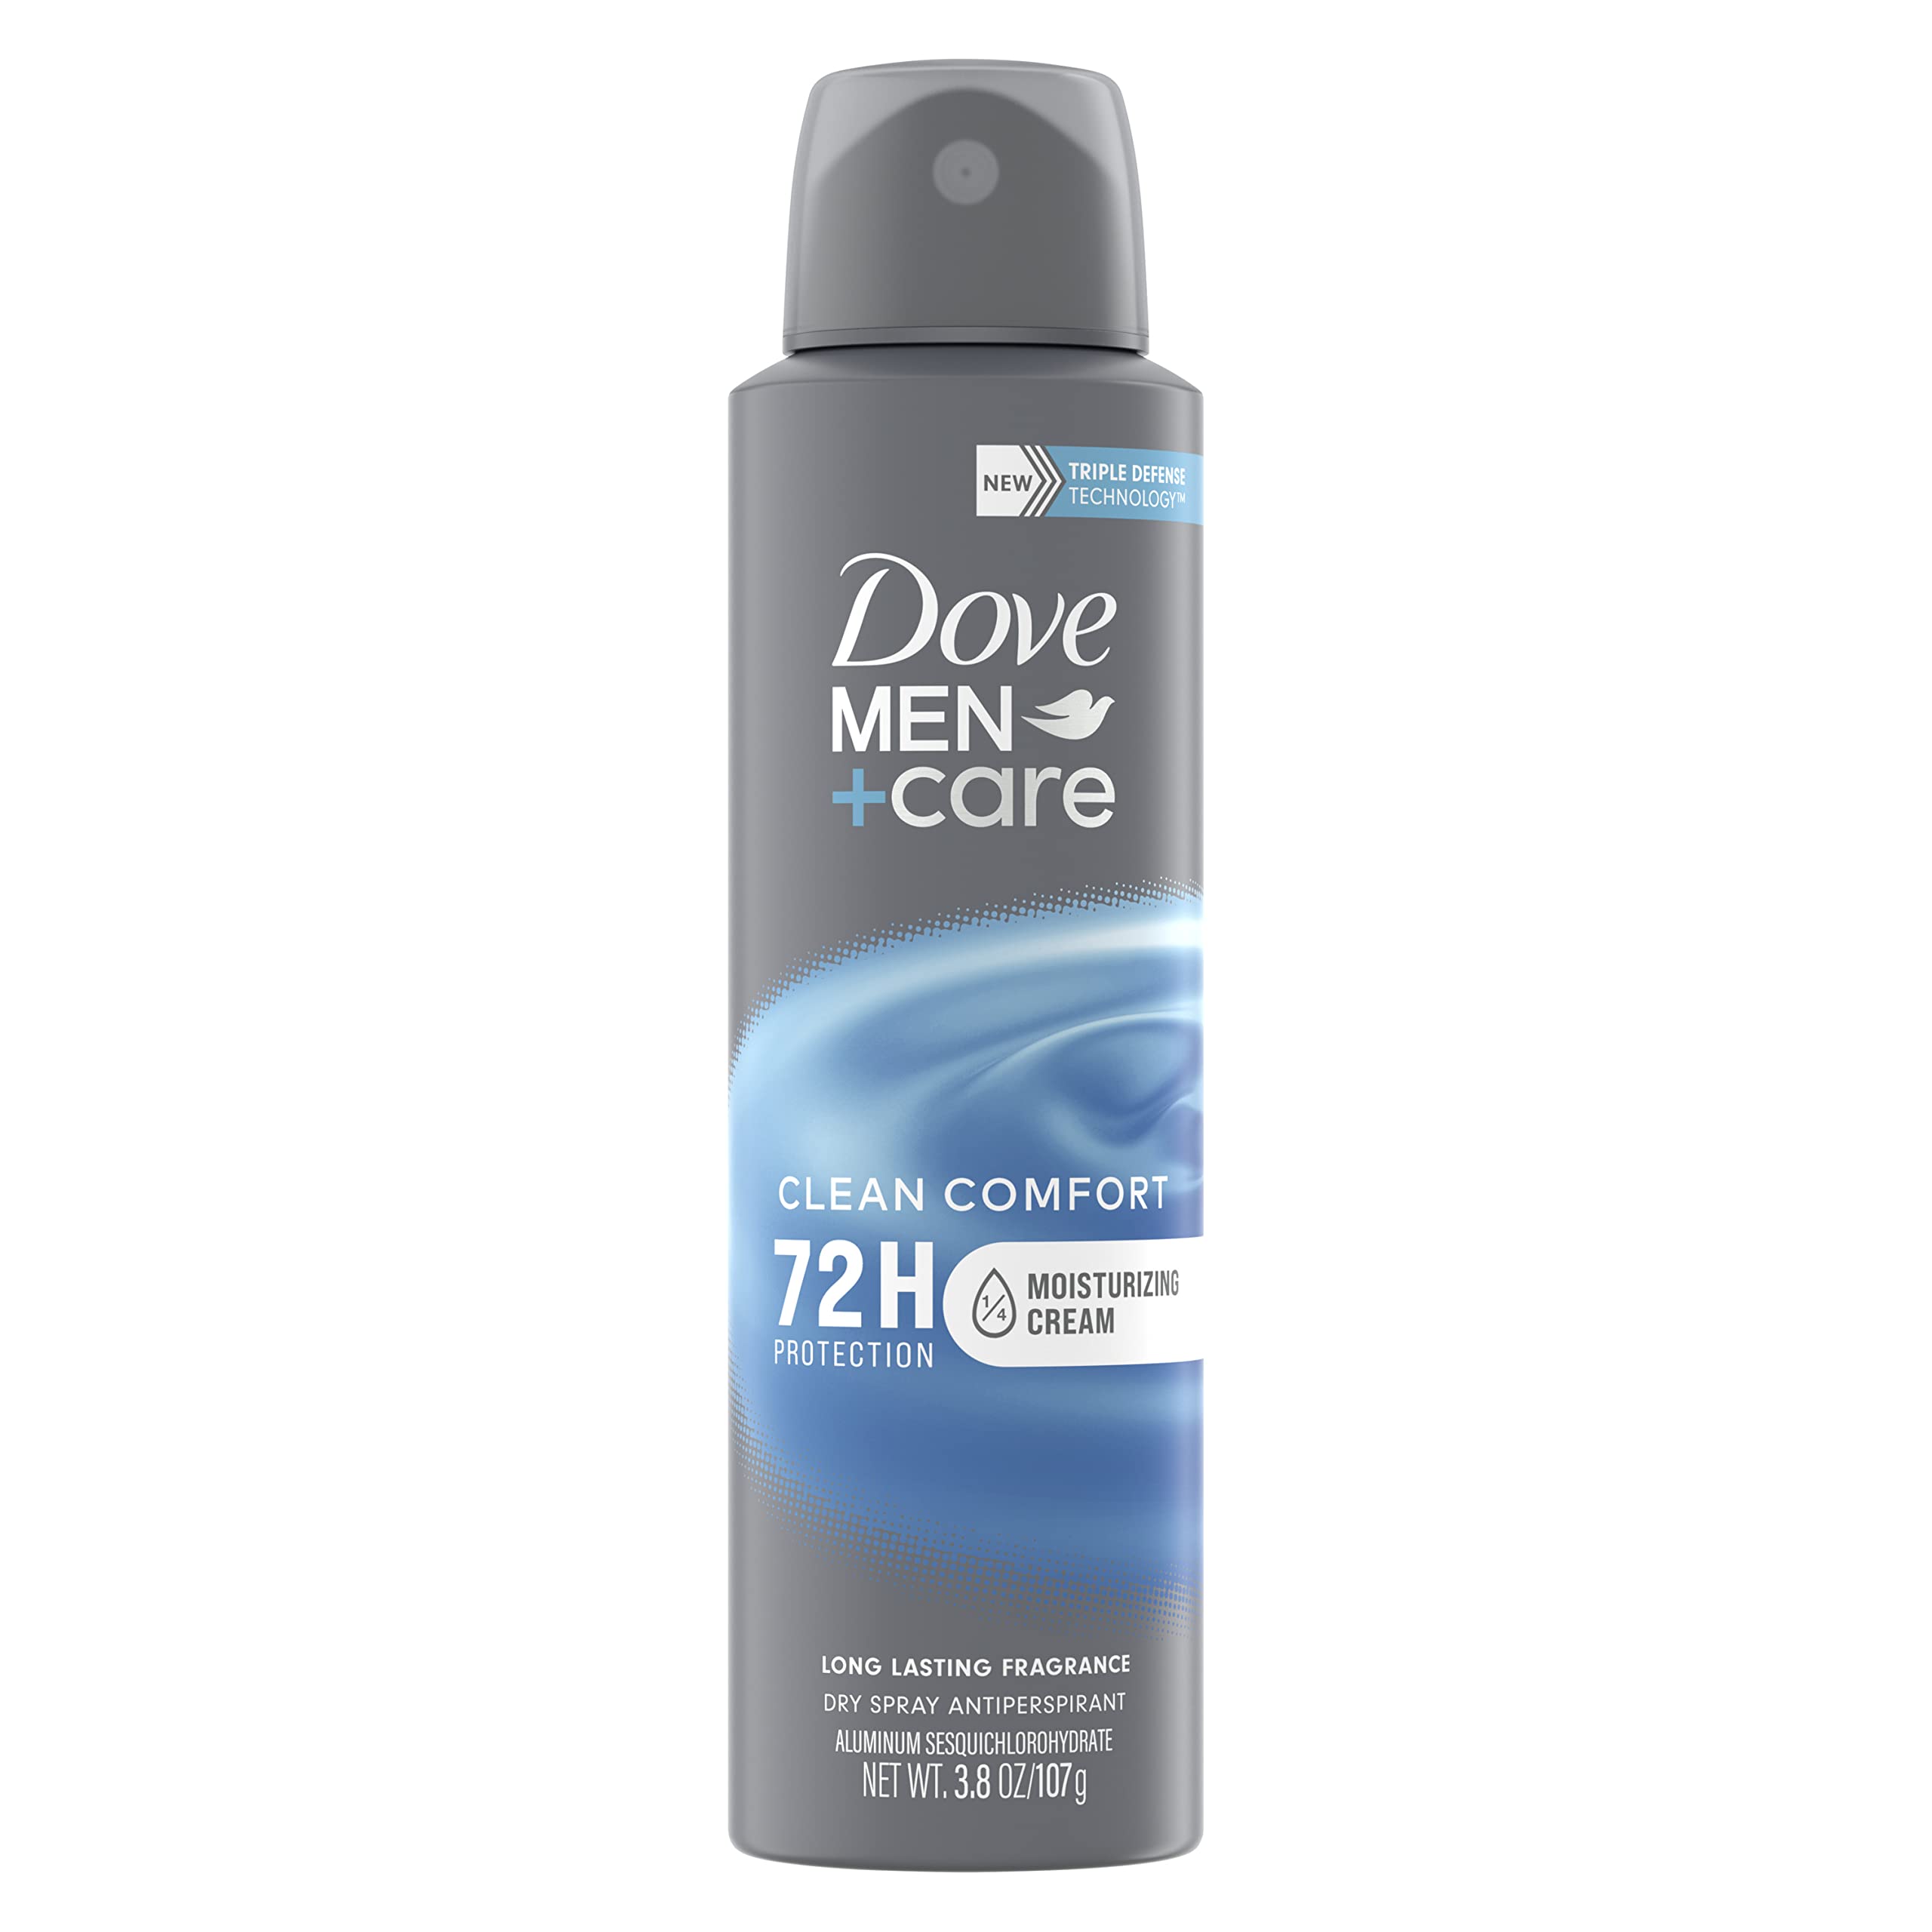 Dove Men+Care Antiperspirant Deodorant Clean Comfort Dry Spray For Men 72-hour Sweat and Odor Protection with Triple Defense Technology 3.8 oz